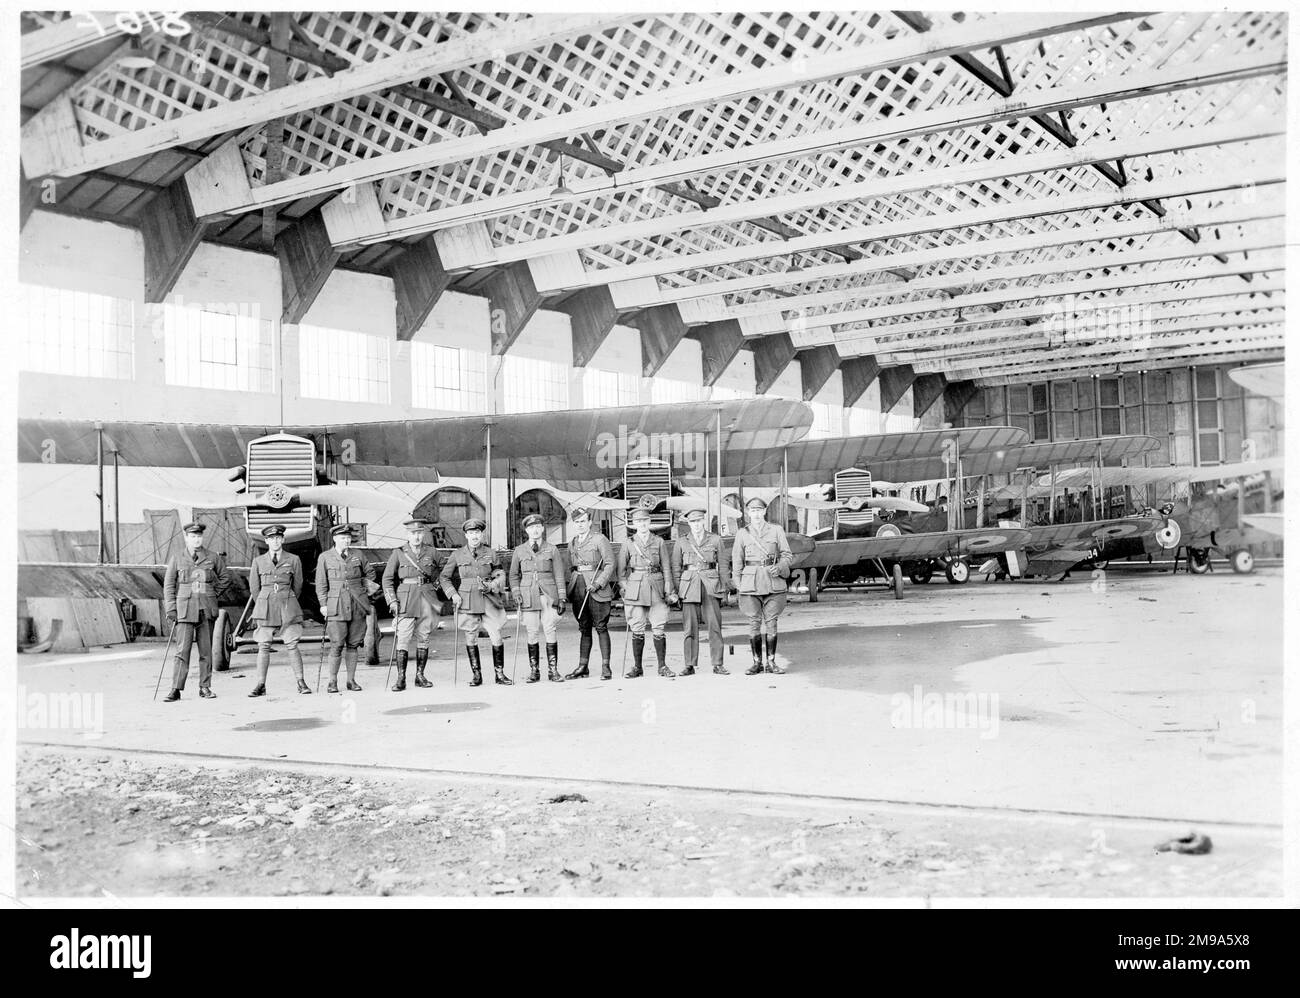 Canadian Air Force - The assembled men and machines of No. 2 Squadron Canadian Air Force (1918-1920), probably at Shoreham aerodrome (or, less likely, Upper Heyford). The Canadian Air Force (CAF) was a contingent of two Canadian air force squadrons - one fighter and one bomber - authorized by the British Air Ministry in August 1918 during the close of the First World War. The unit was independent from the Canadian Expeditionary Force and the Royal Air Force (RAF). No.2 Squadron of the Canadian Air Force was equipped with Airco DH.9A day bombers and was active throughout the short life of the Stock Photo